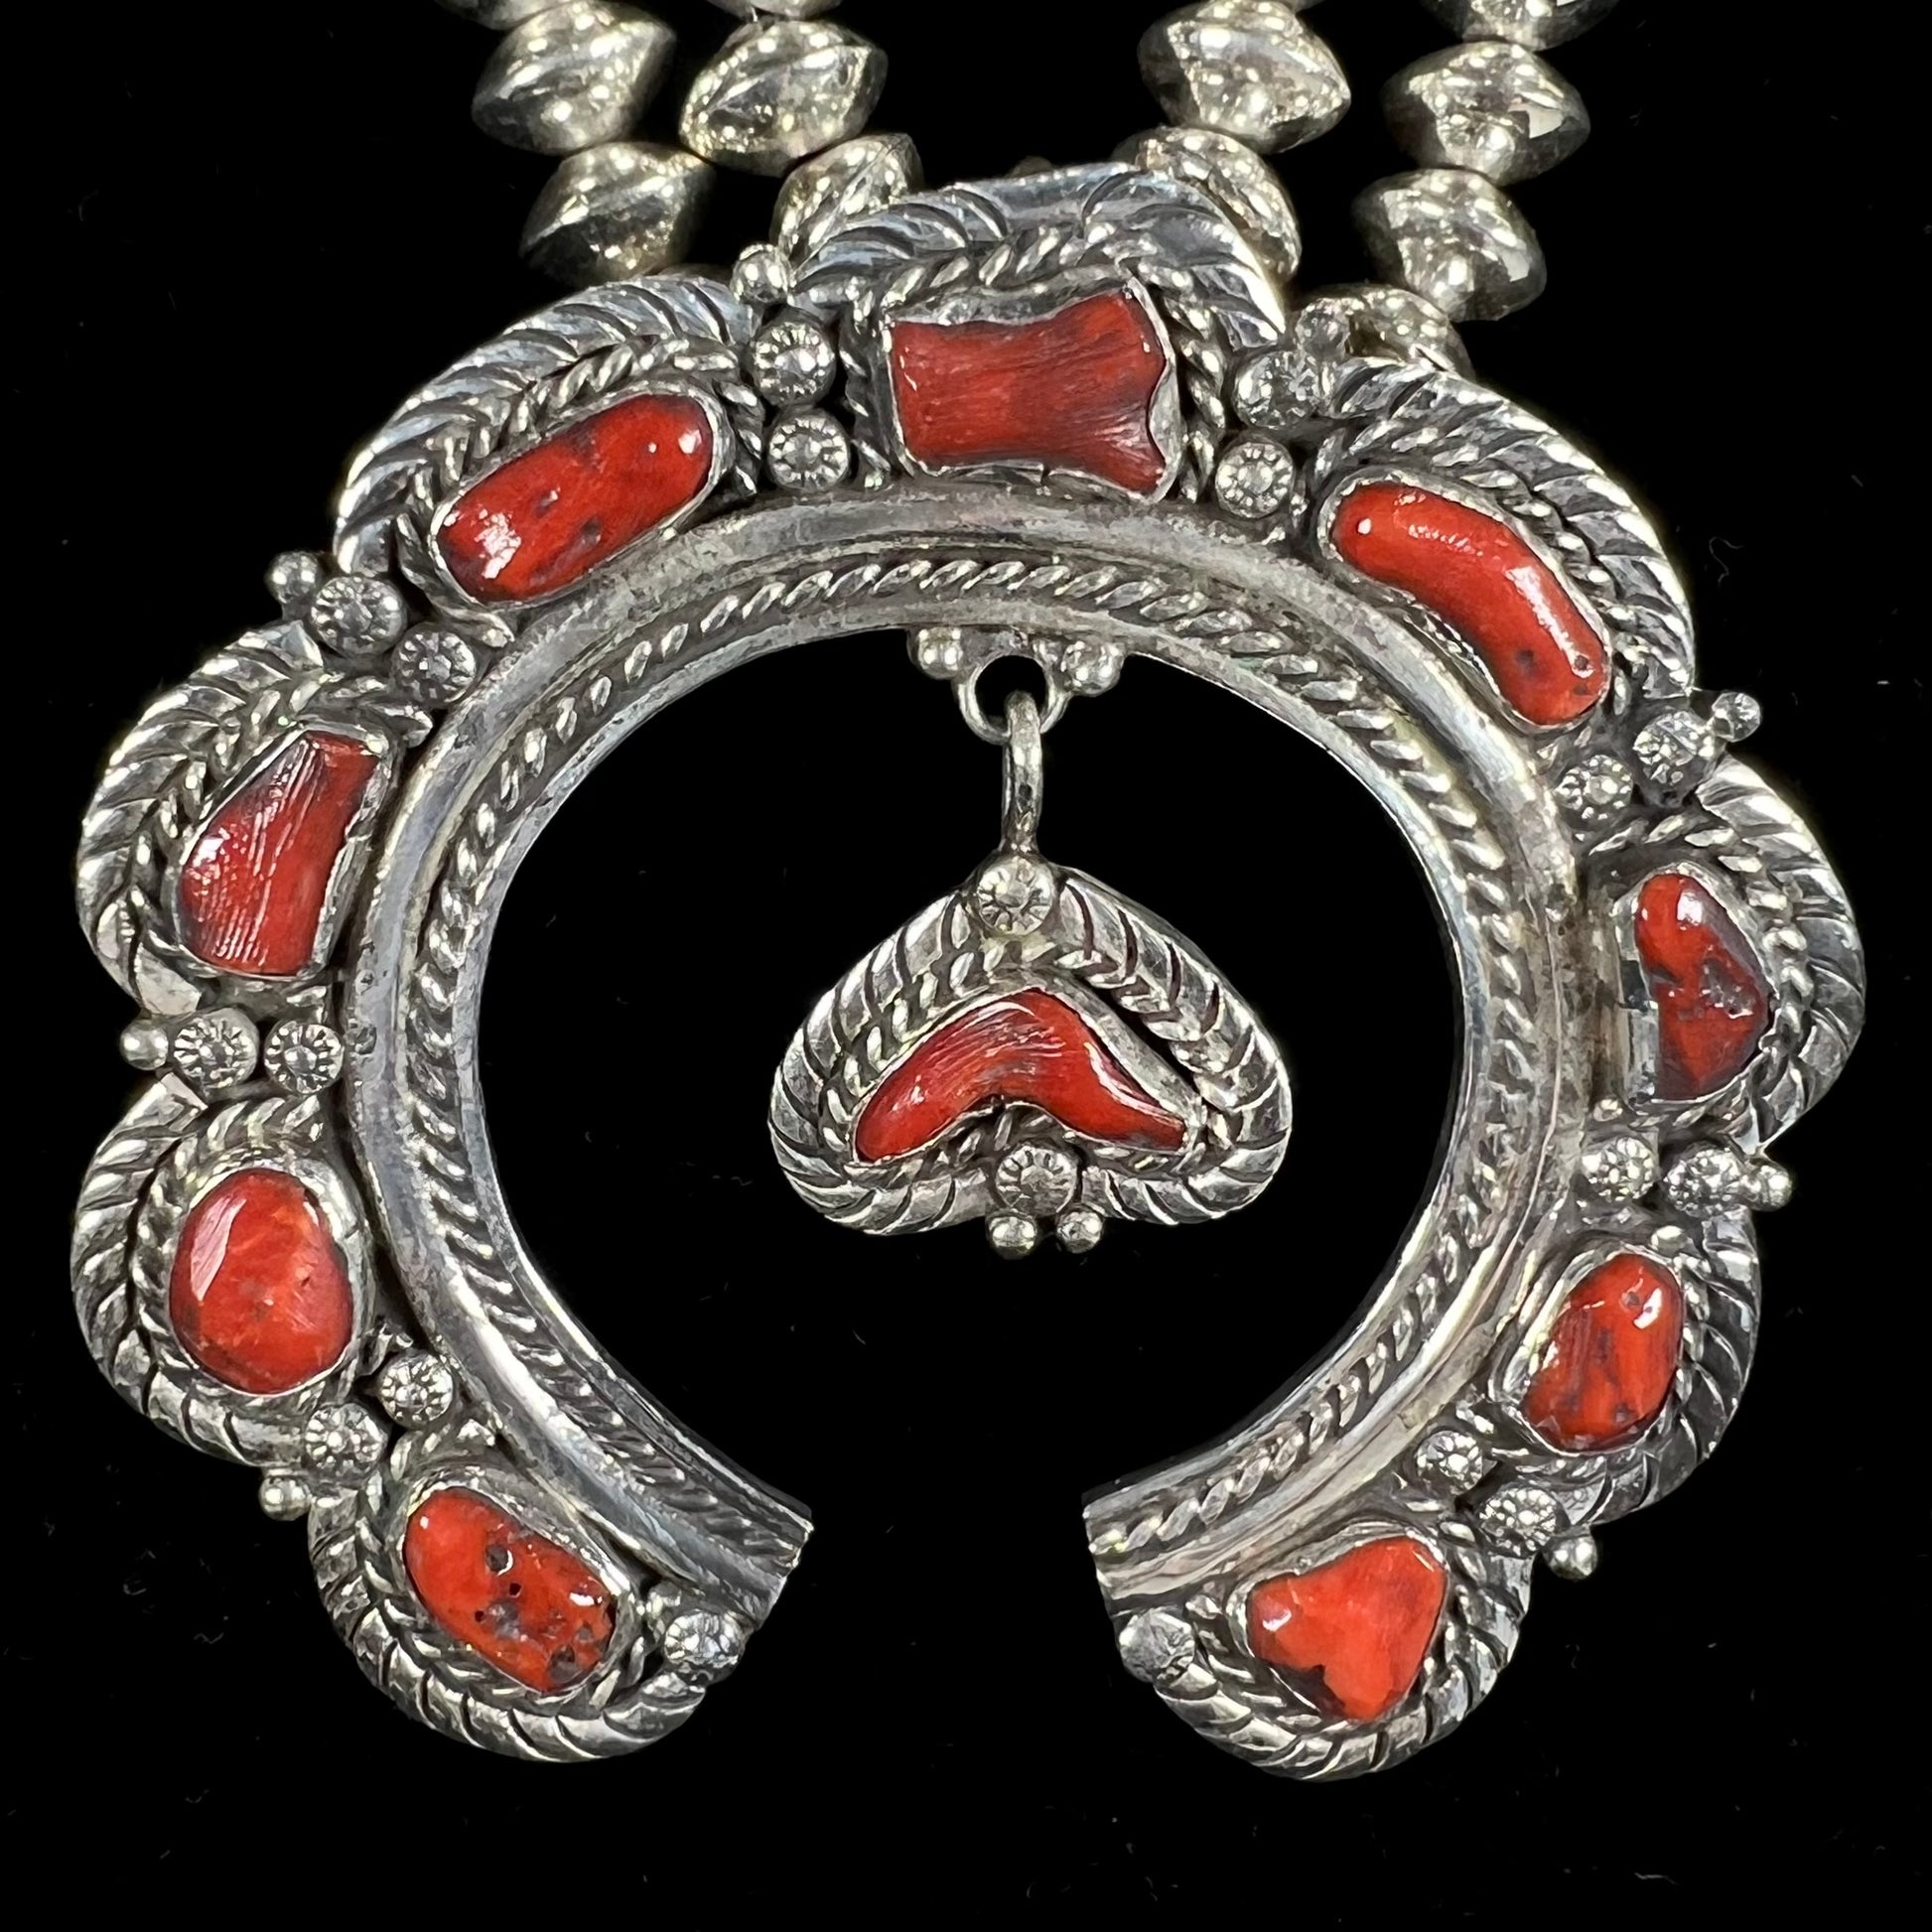 A Navajo style squash blossom necklace set with red coral branches, handmade by artist Delbert Chatter.